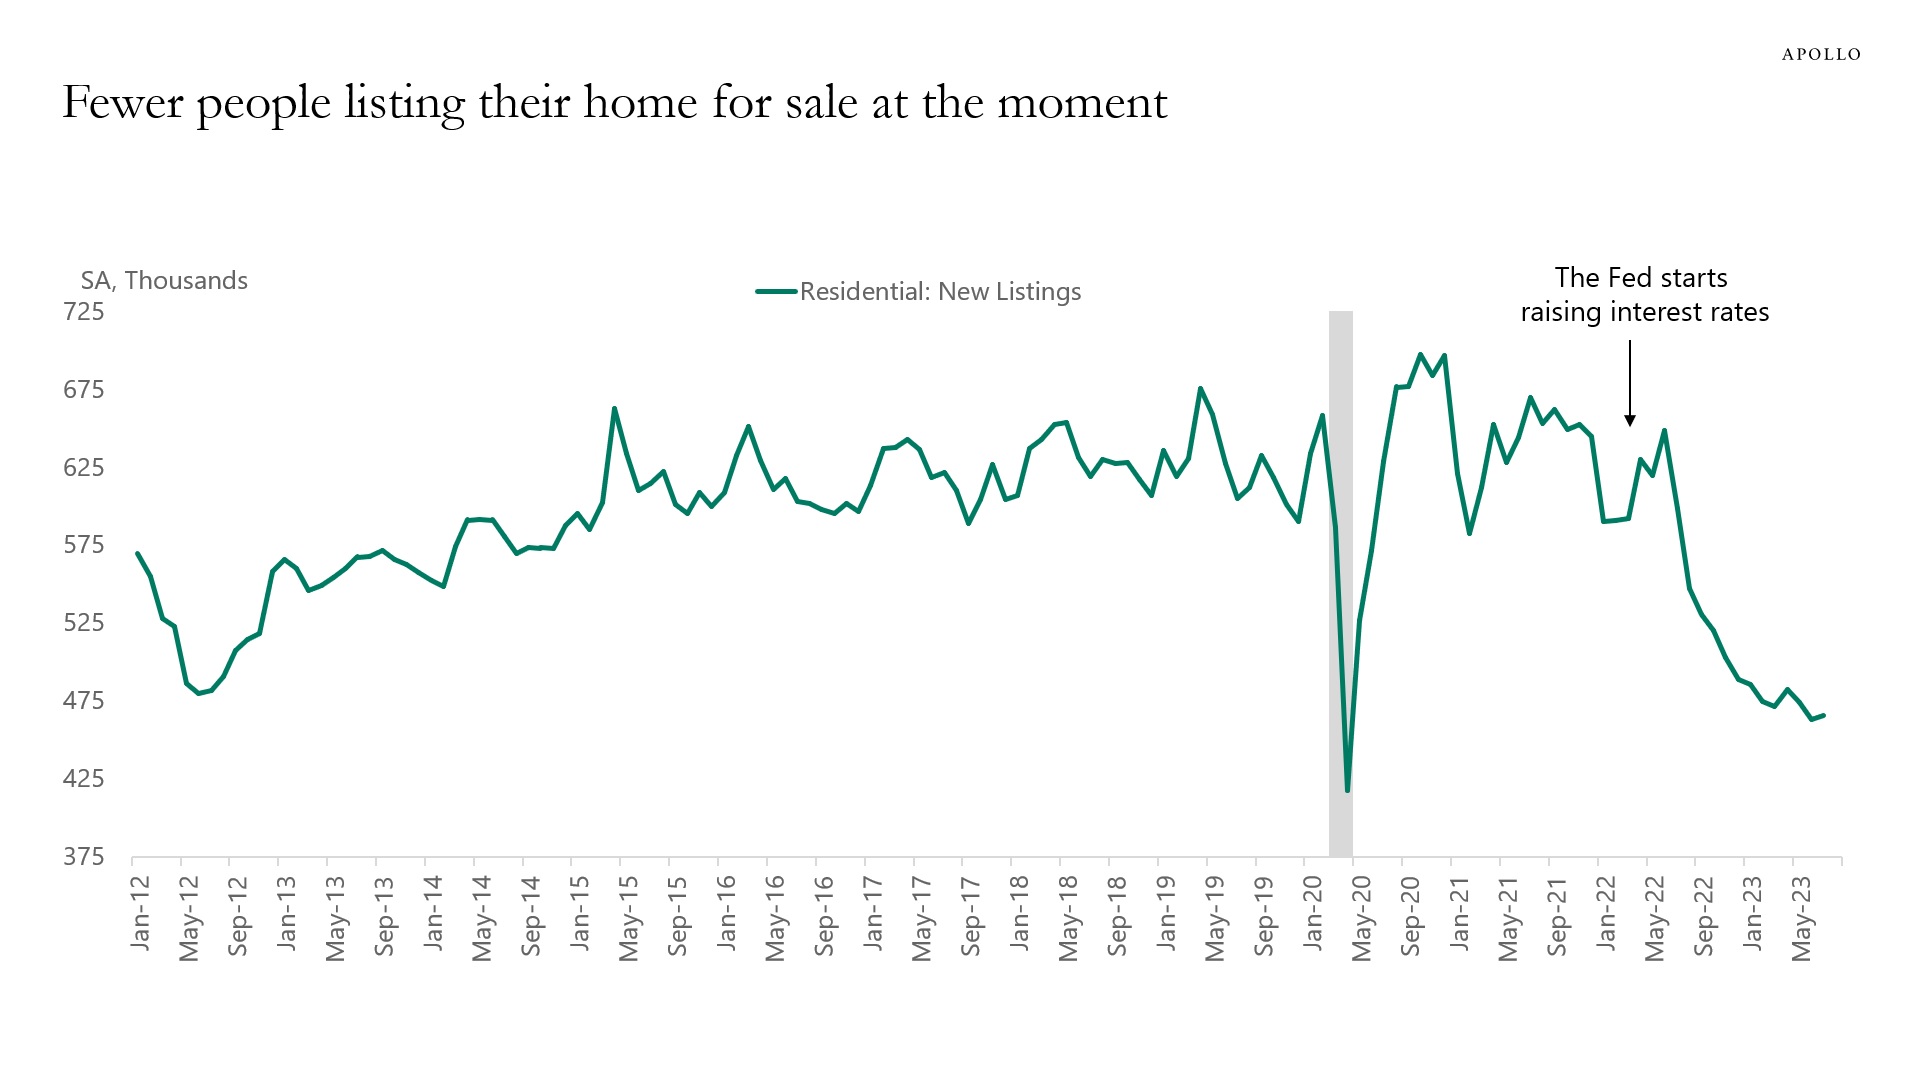 Fewer people listing their home for sale at the moment